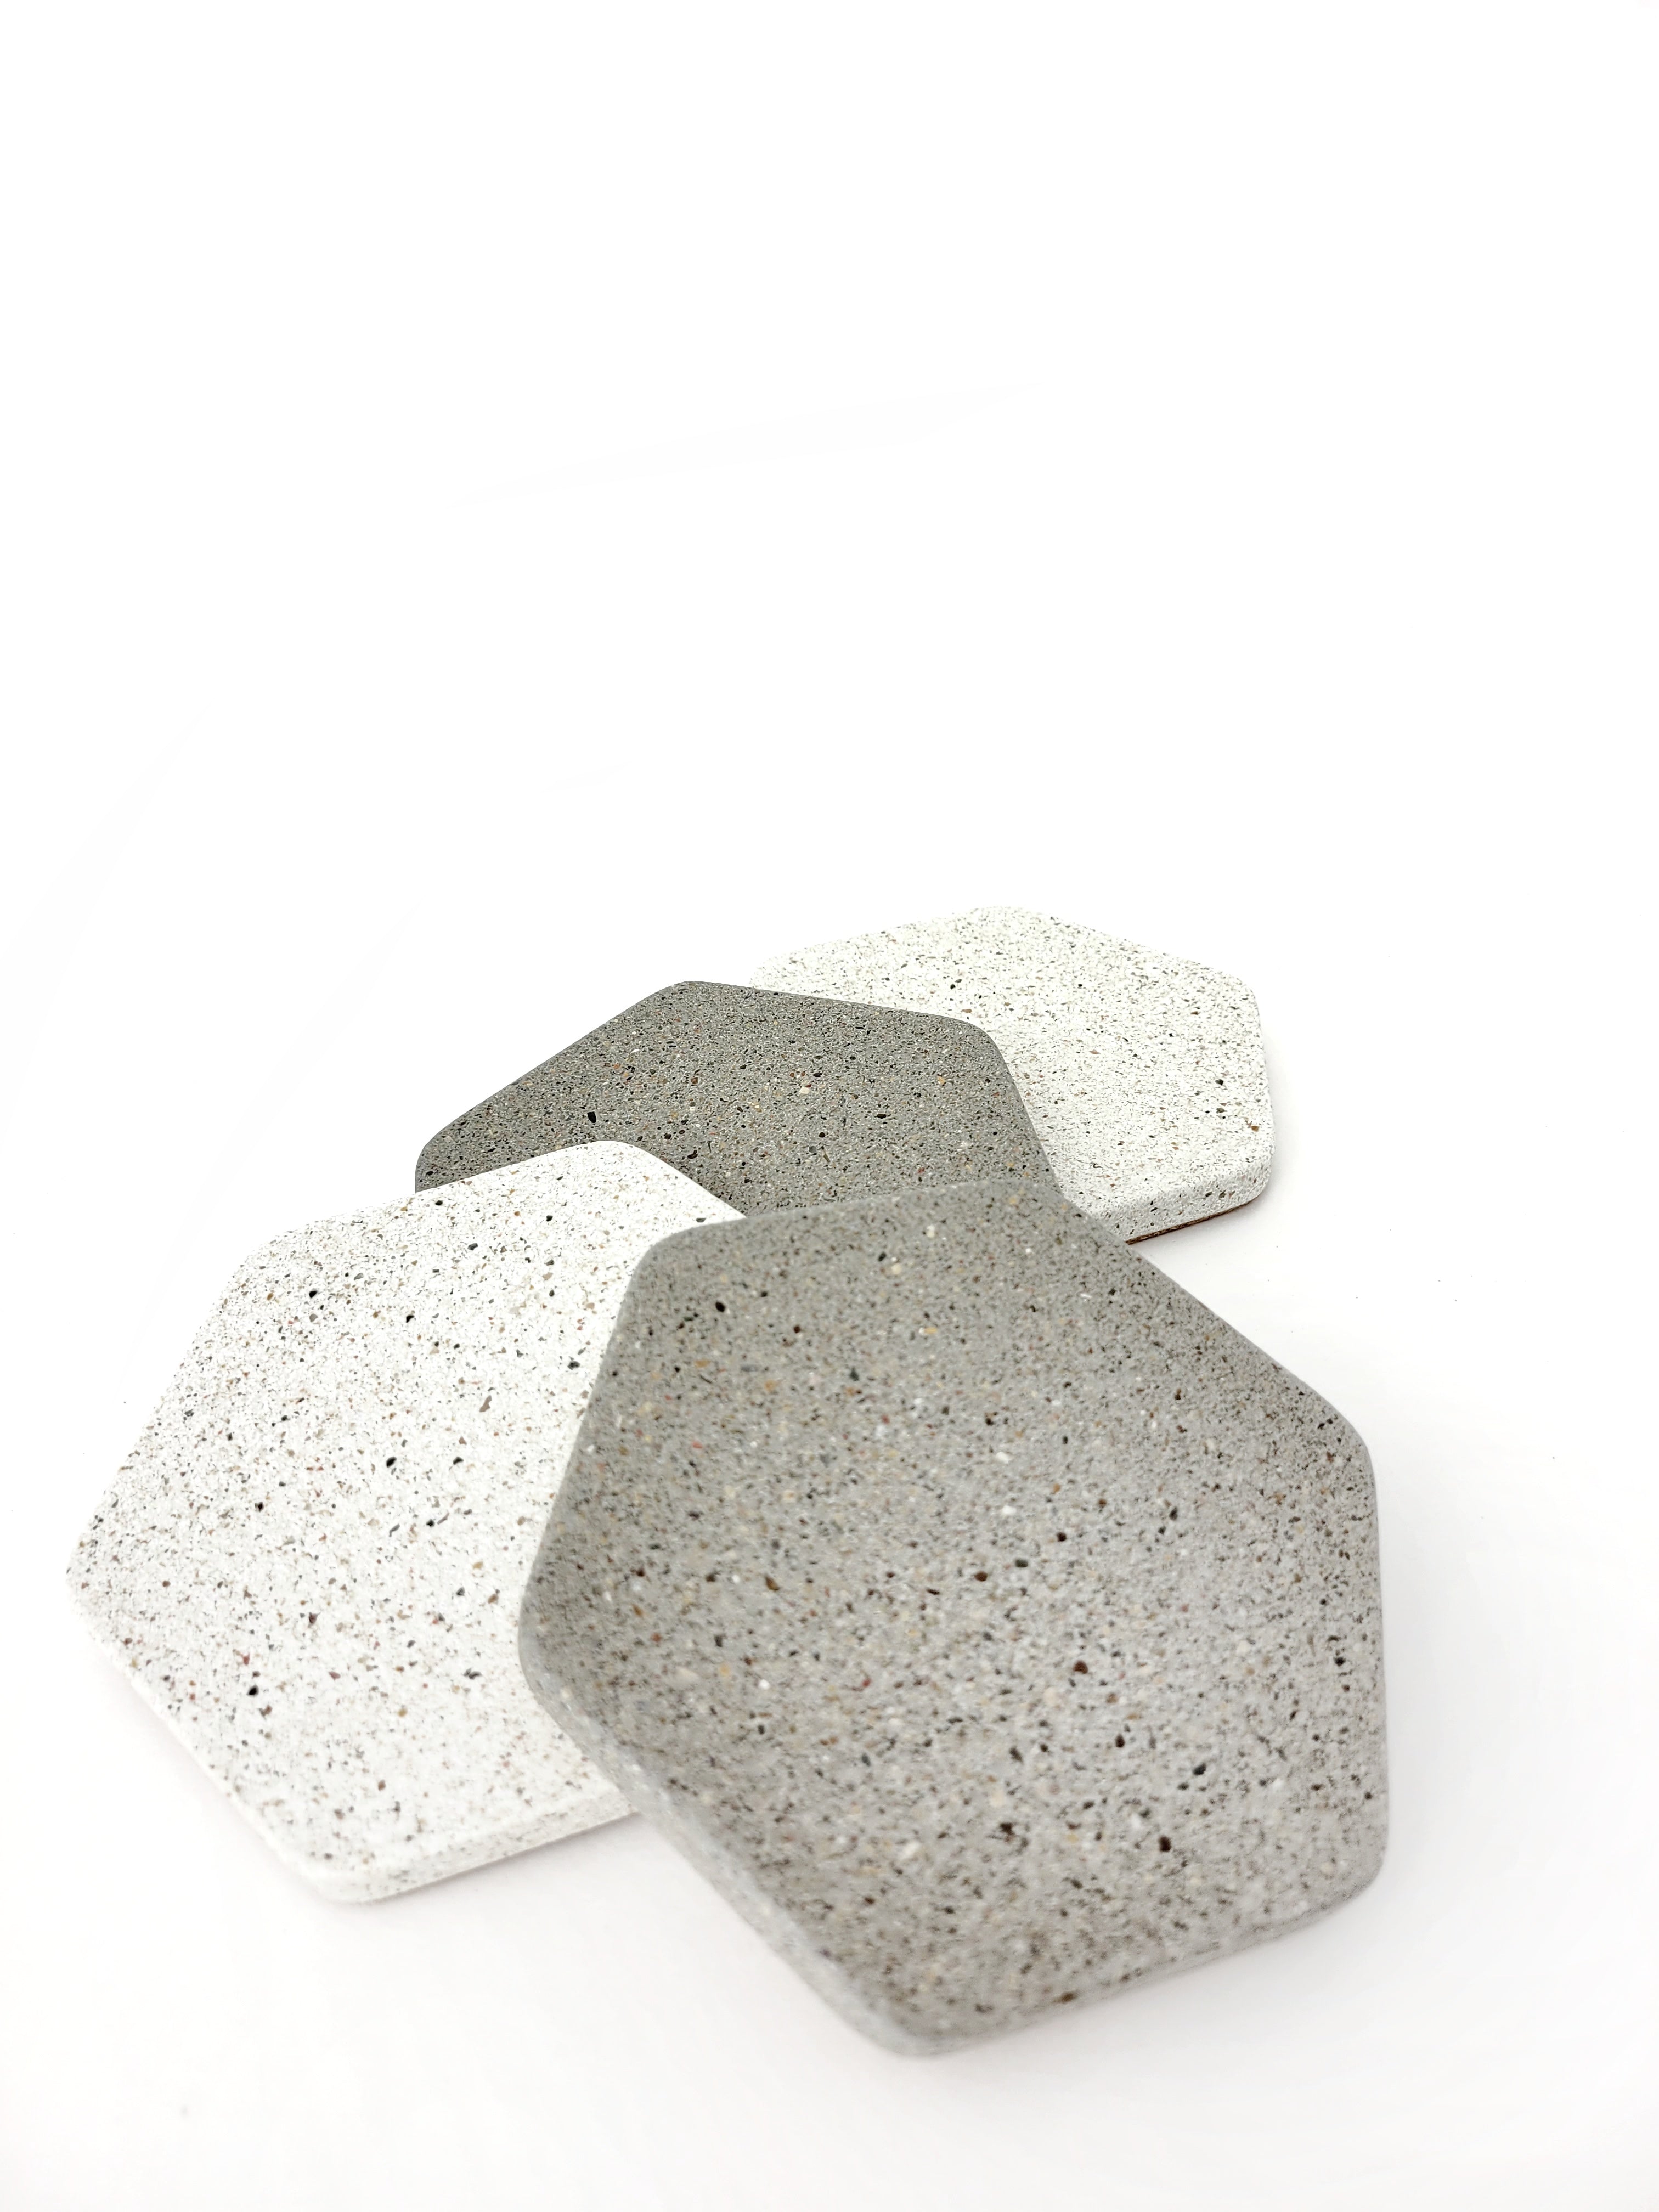 Two grey and two white hexagon sandstone coasters arranged vertically, alternating between grey and white.